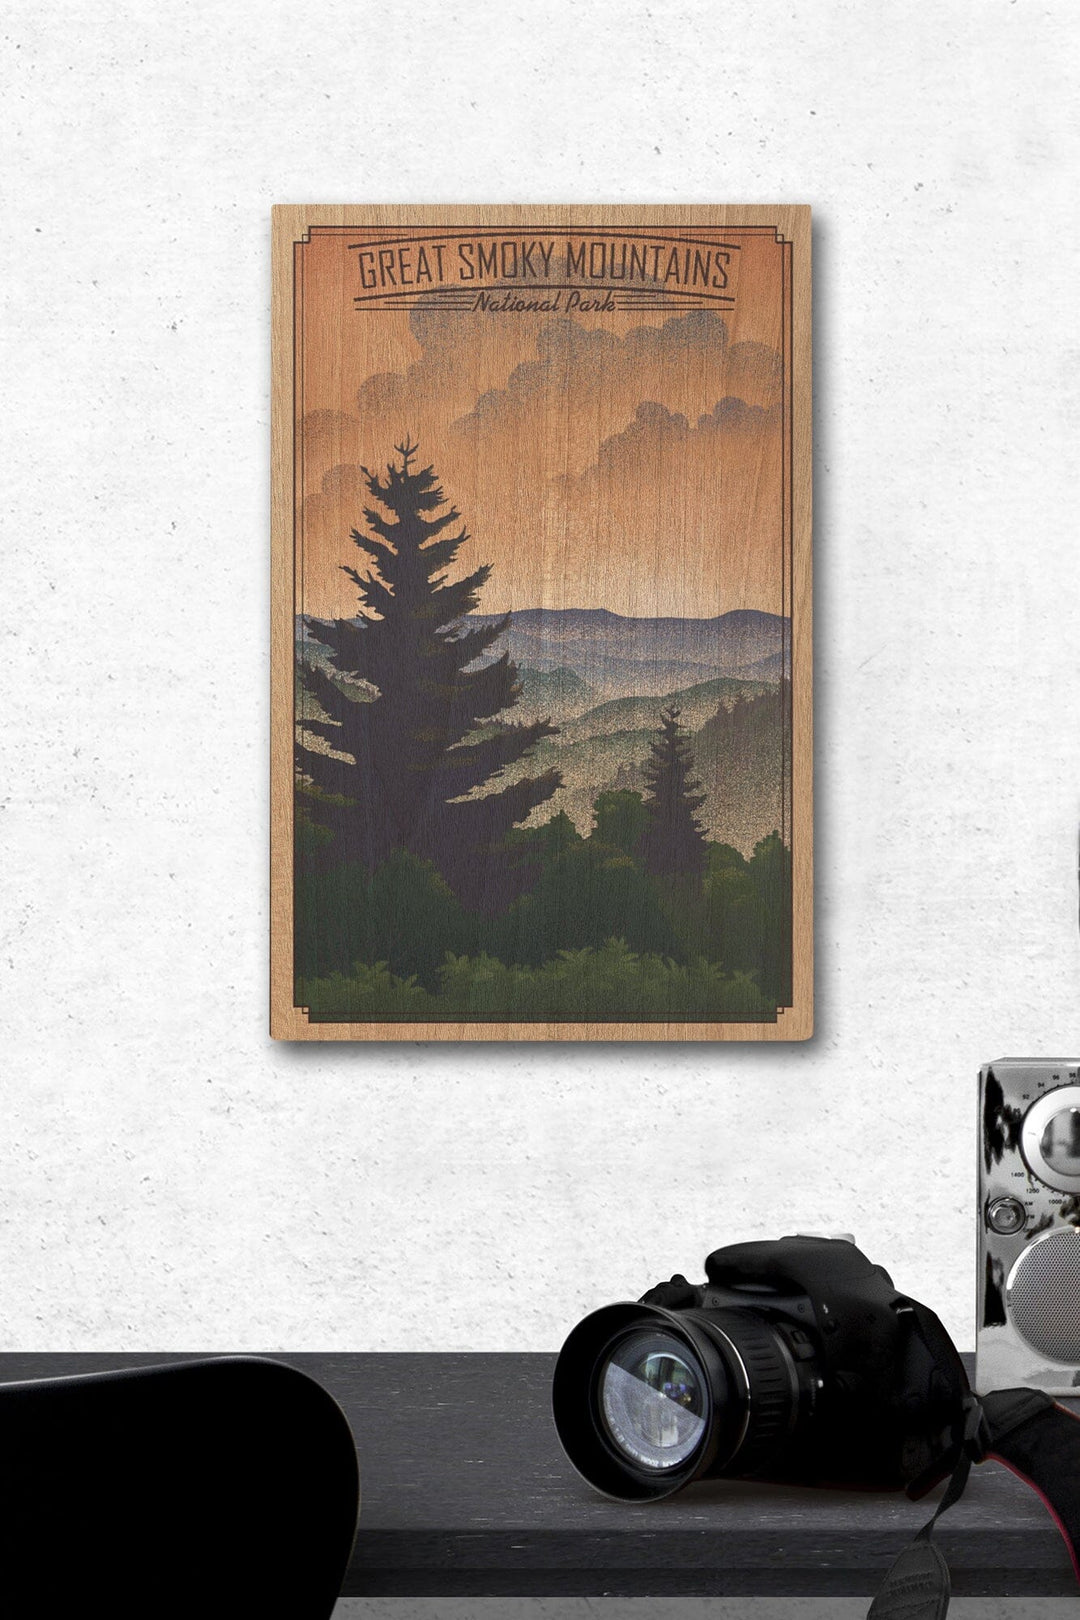 Great Smoky Mountains National Park, Newfound Gap, Lithograph National Park Series, Lantern Press Artwork, Wood Signs and Postcards Wood Lantern Press 12 x 18 Wood Gallery Print 